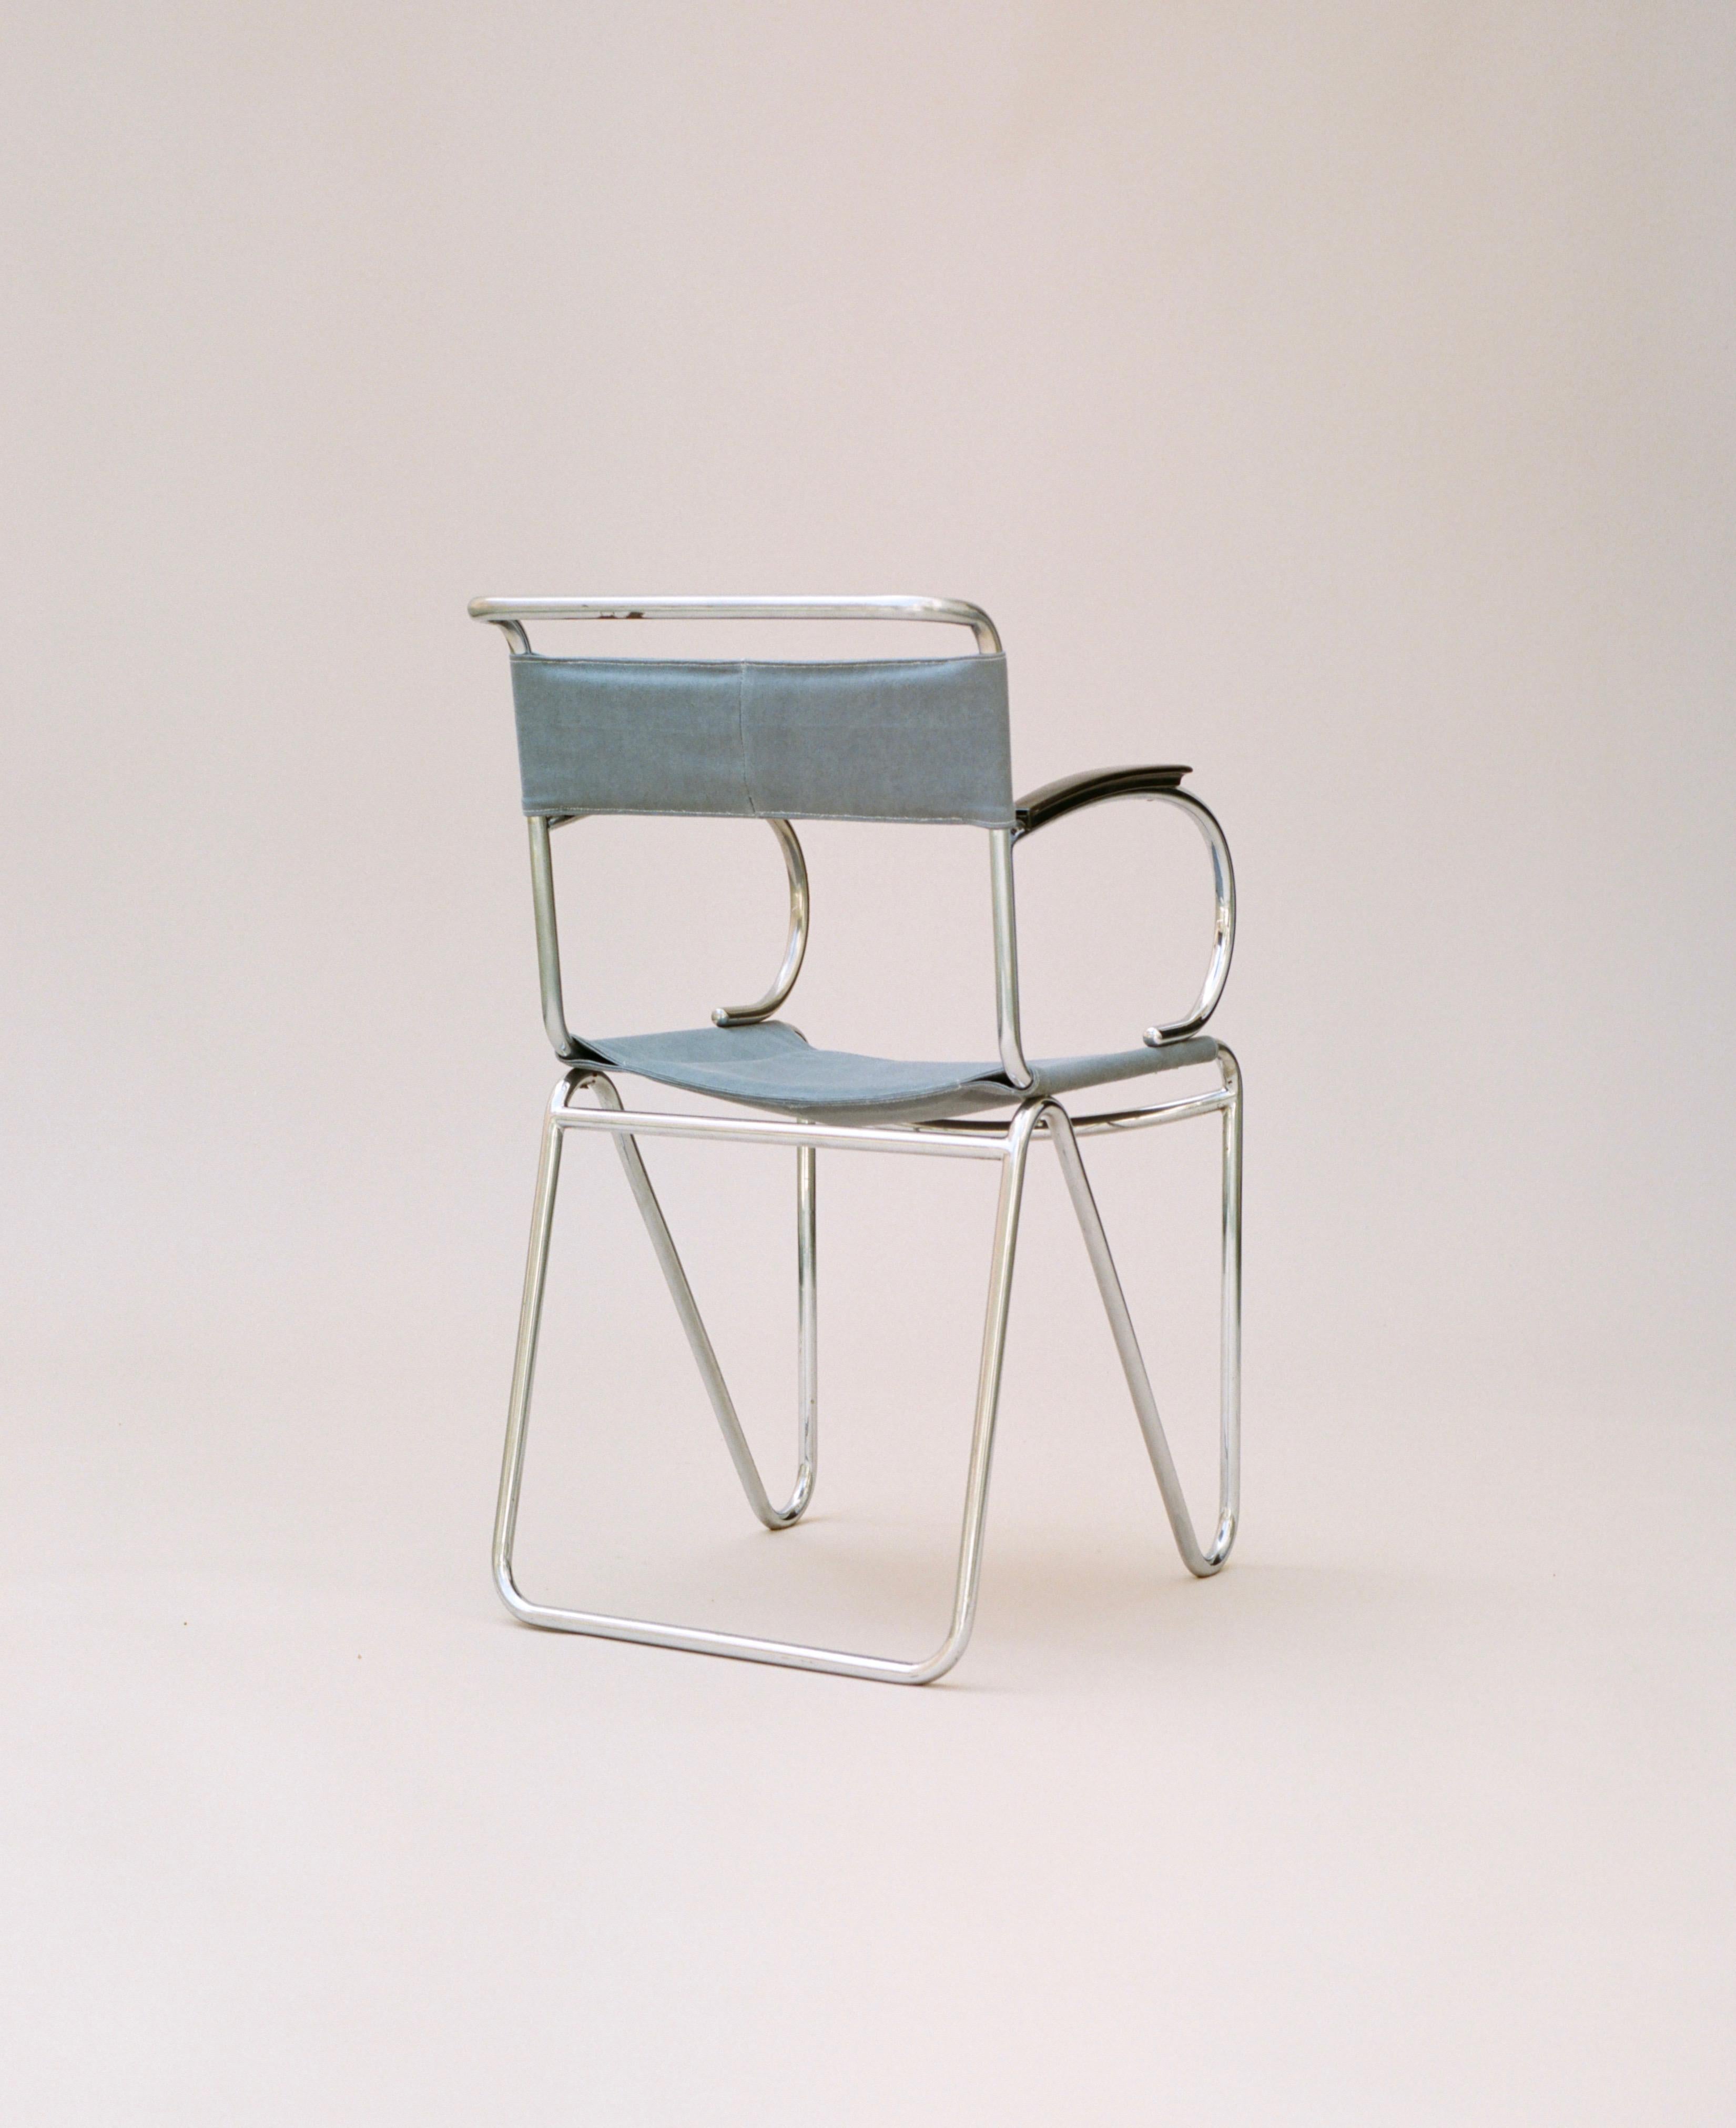 W.H. Gispen (1890-1981) did not invent the concept of tubular steel furniture in the early 20th century but he was largely responsible for translating a set of new design ideals to a Dutch audience. Restraint, elimination of ornament, comfort, and